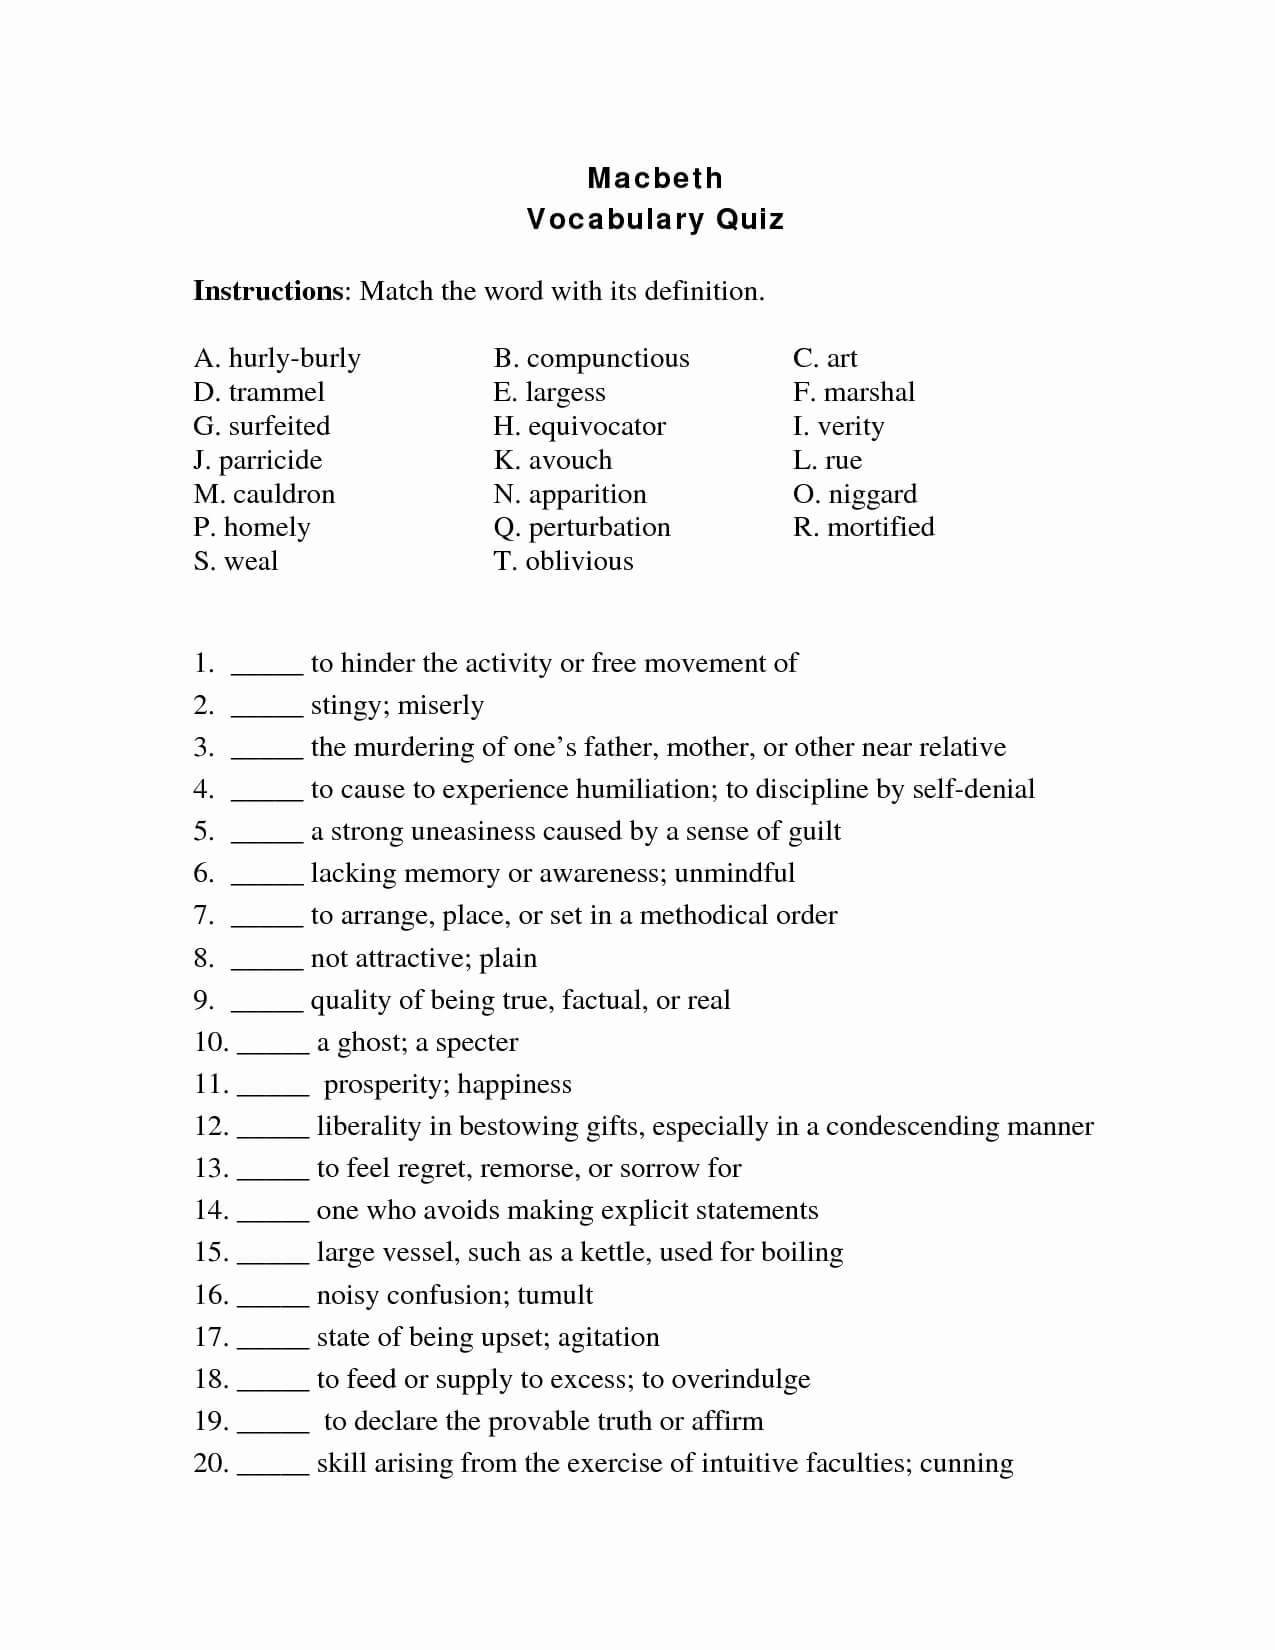 50 Matching Test Template Microsoft Word | Culturatti With Regard To Test Template For Word